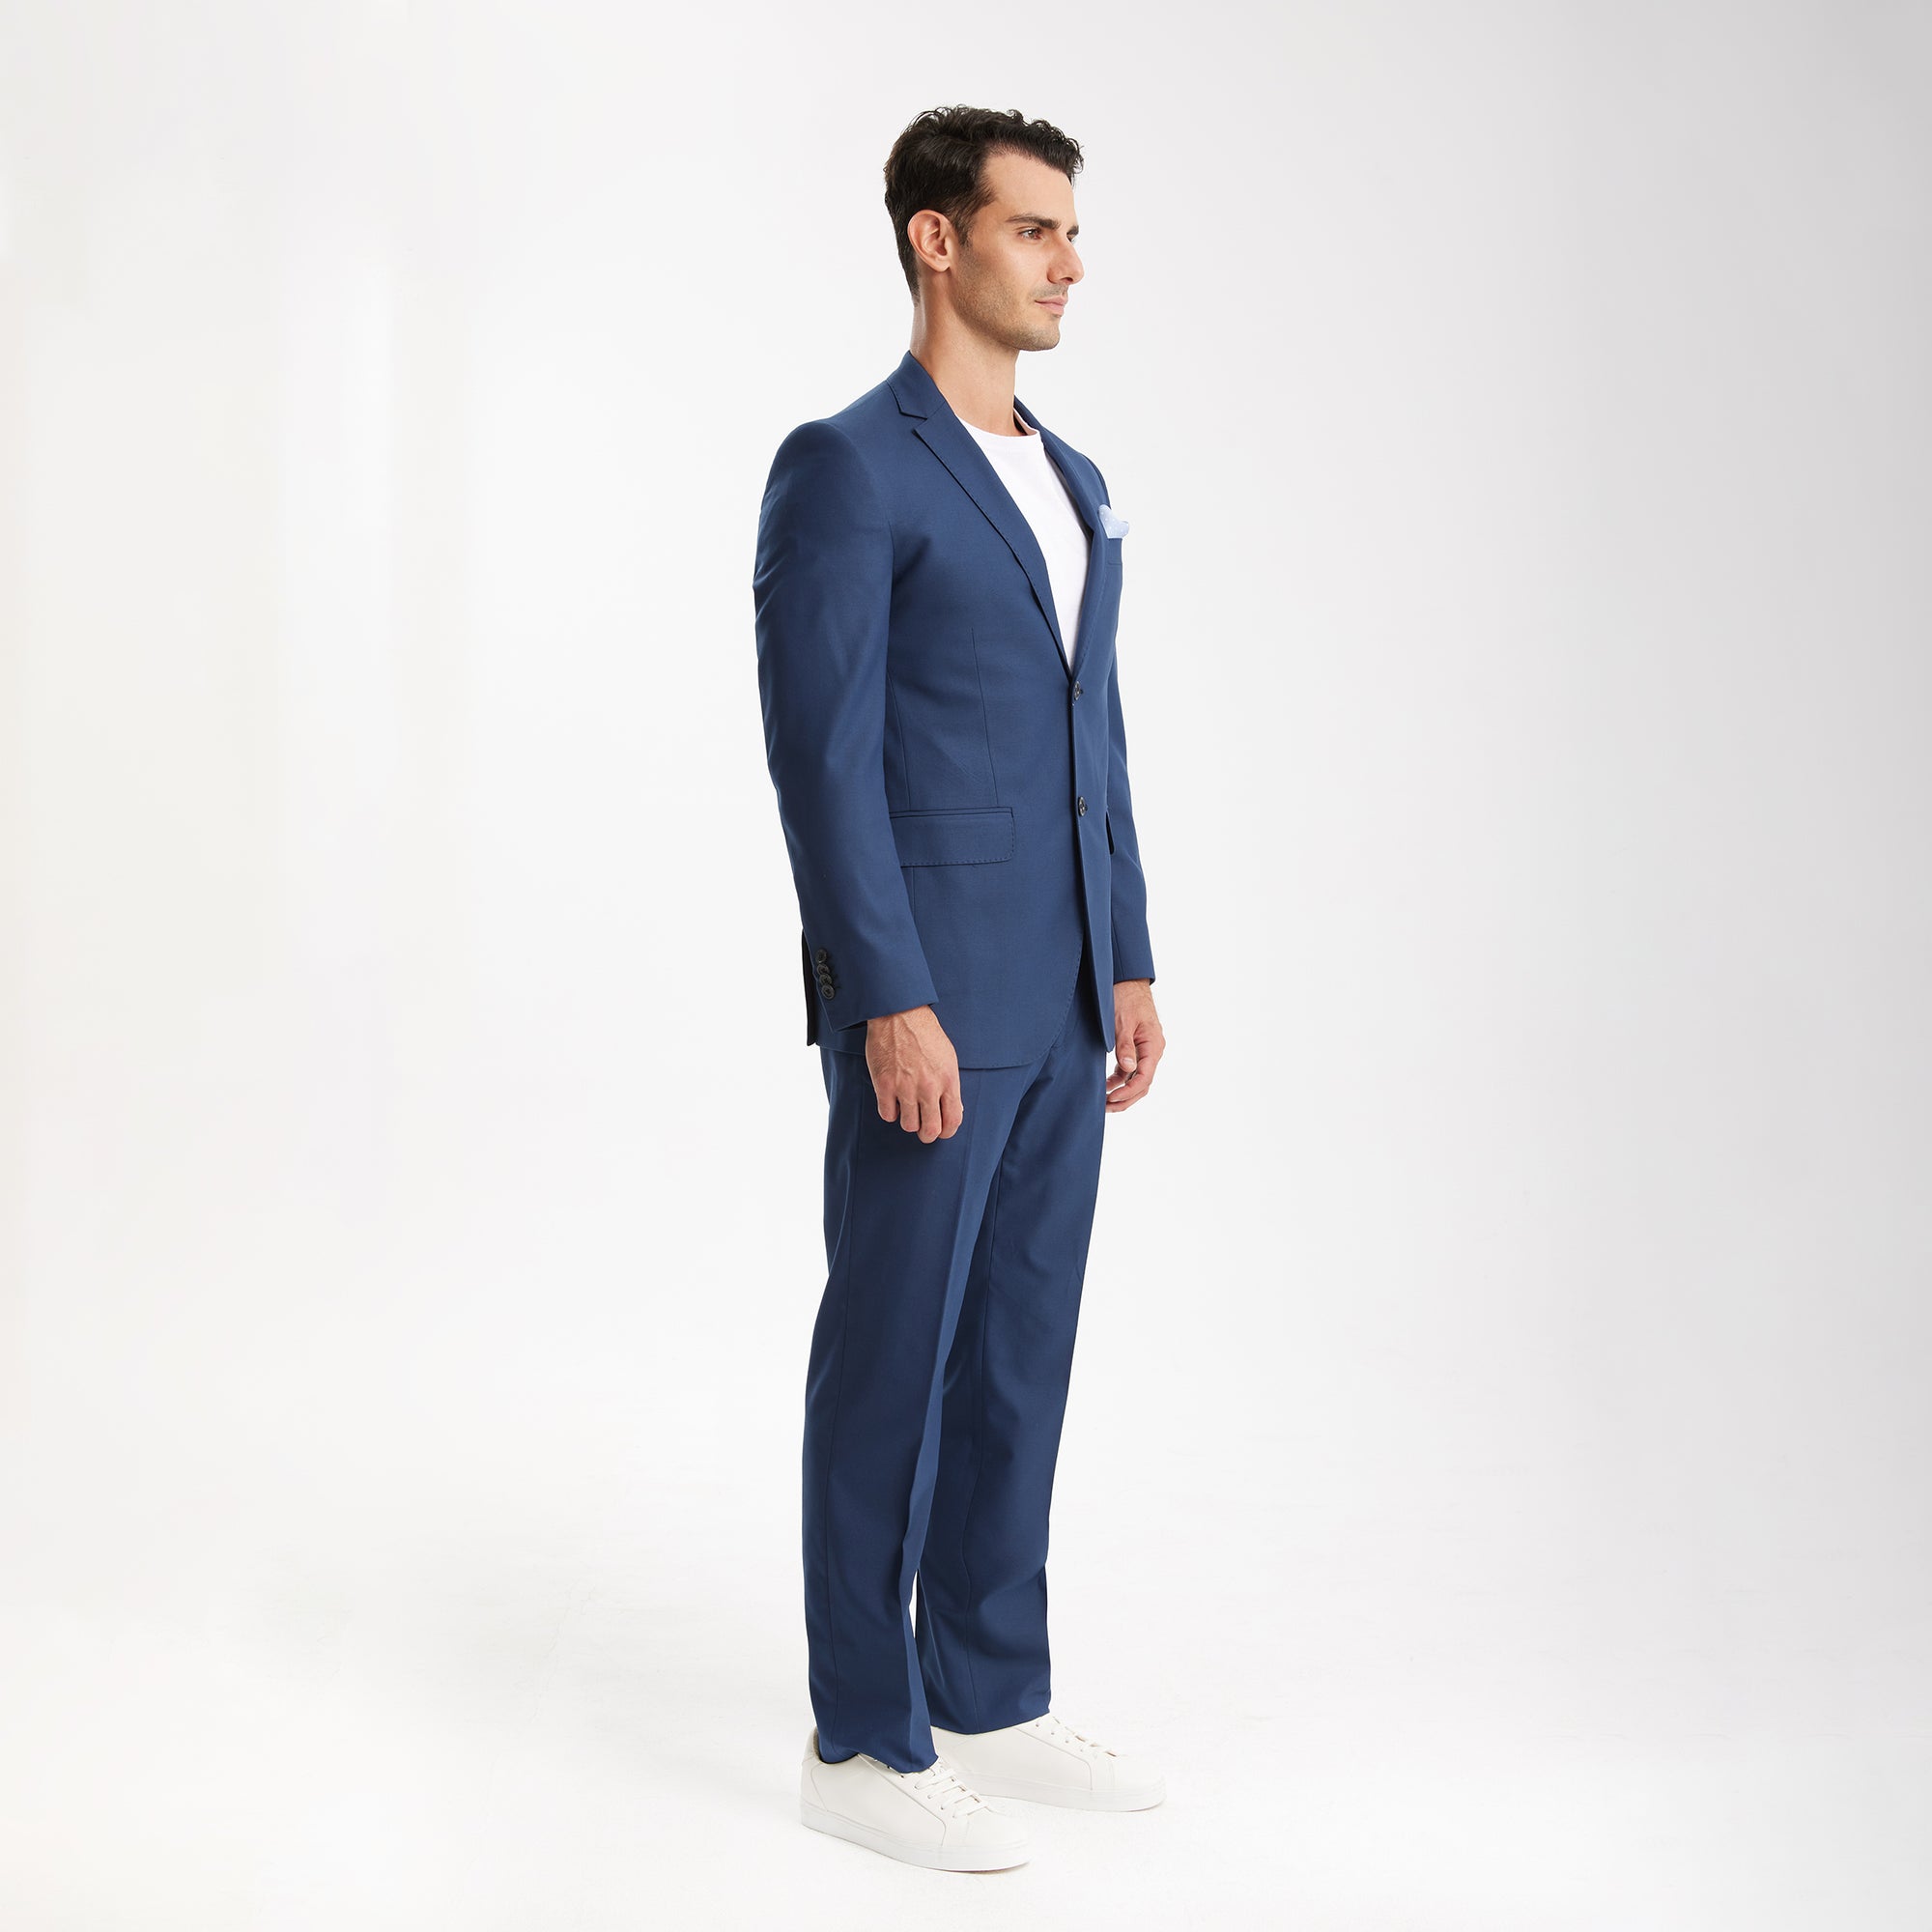 Blue Tailored Fit Wool Suit